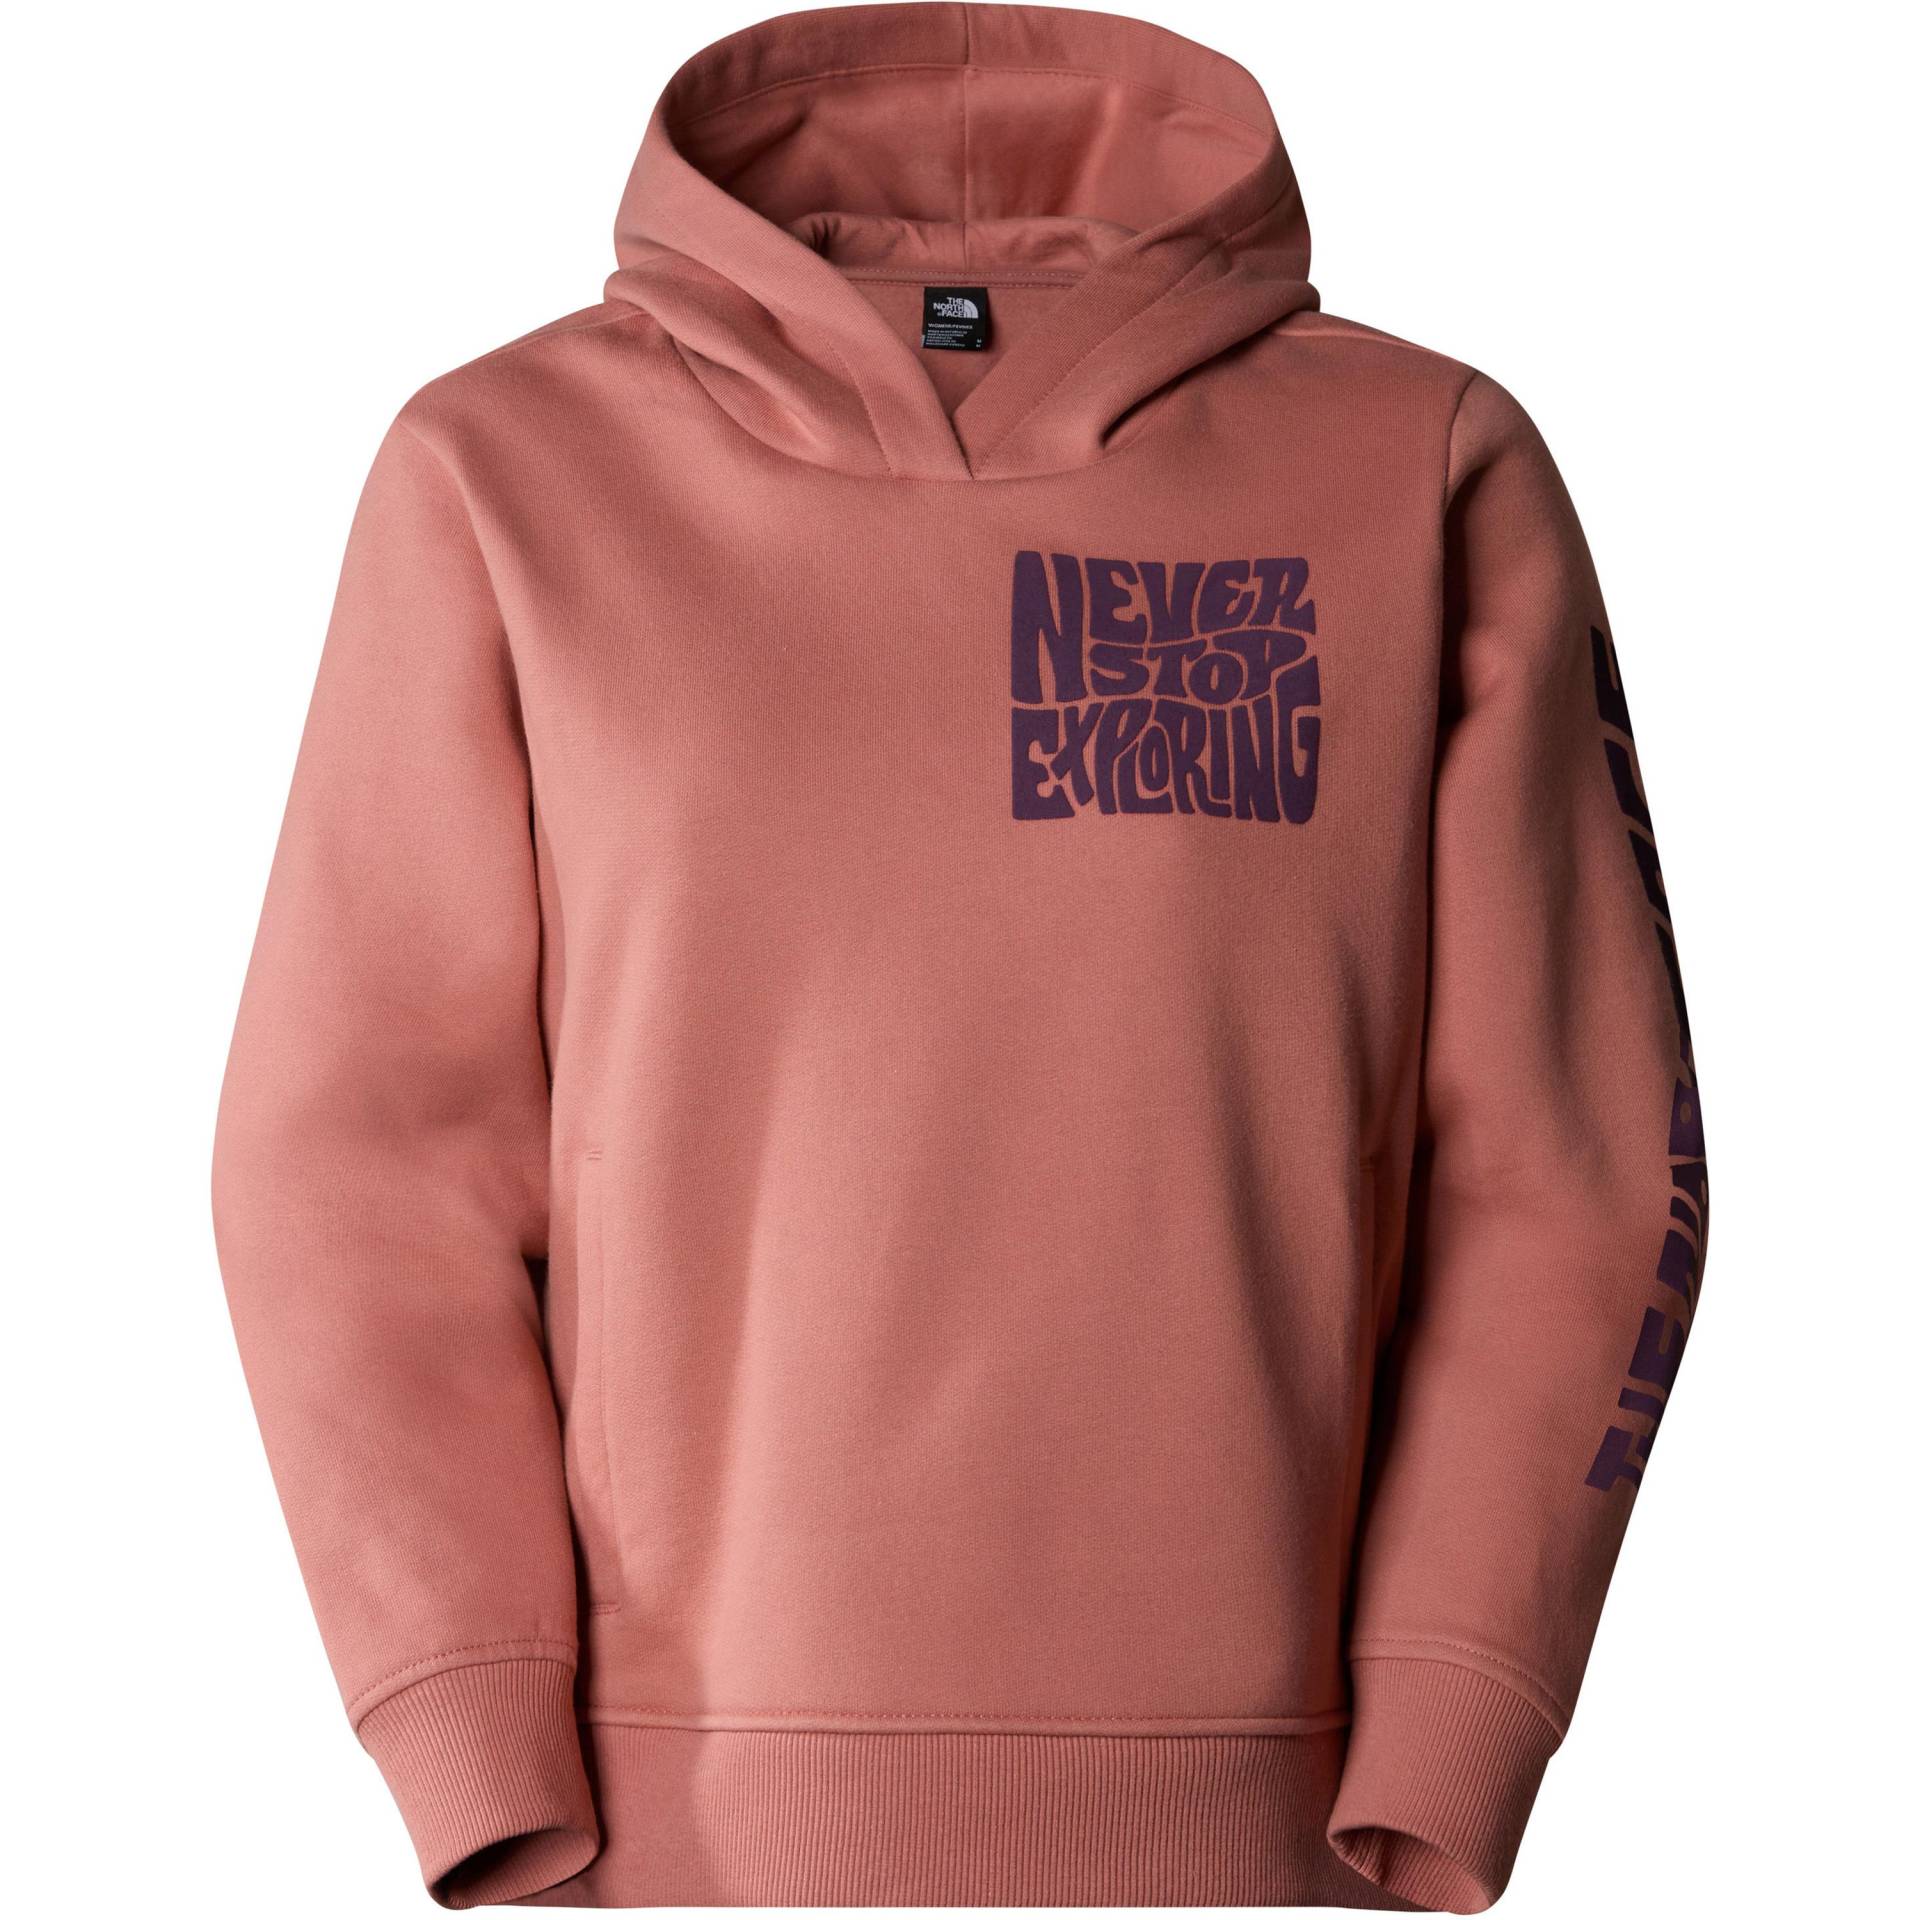 The North Face Mountain Play Hoodie Damen von The North Face